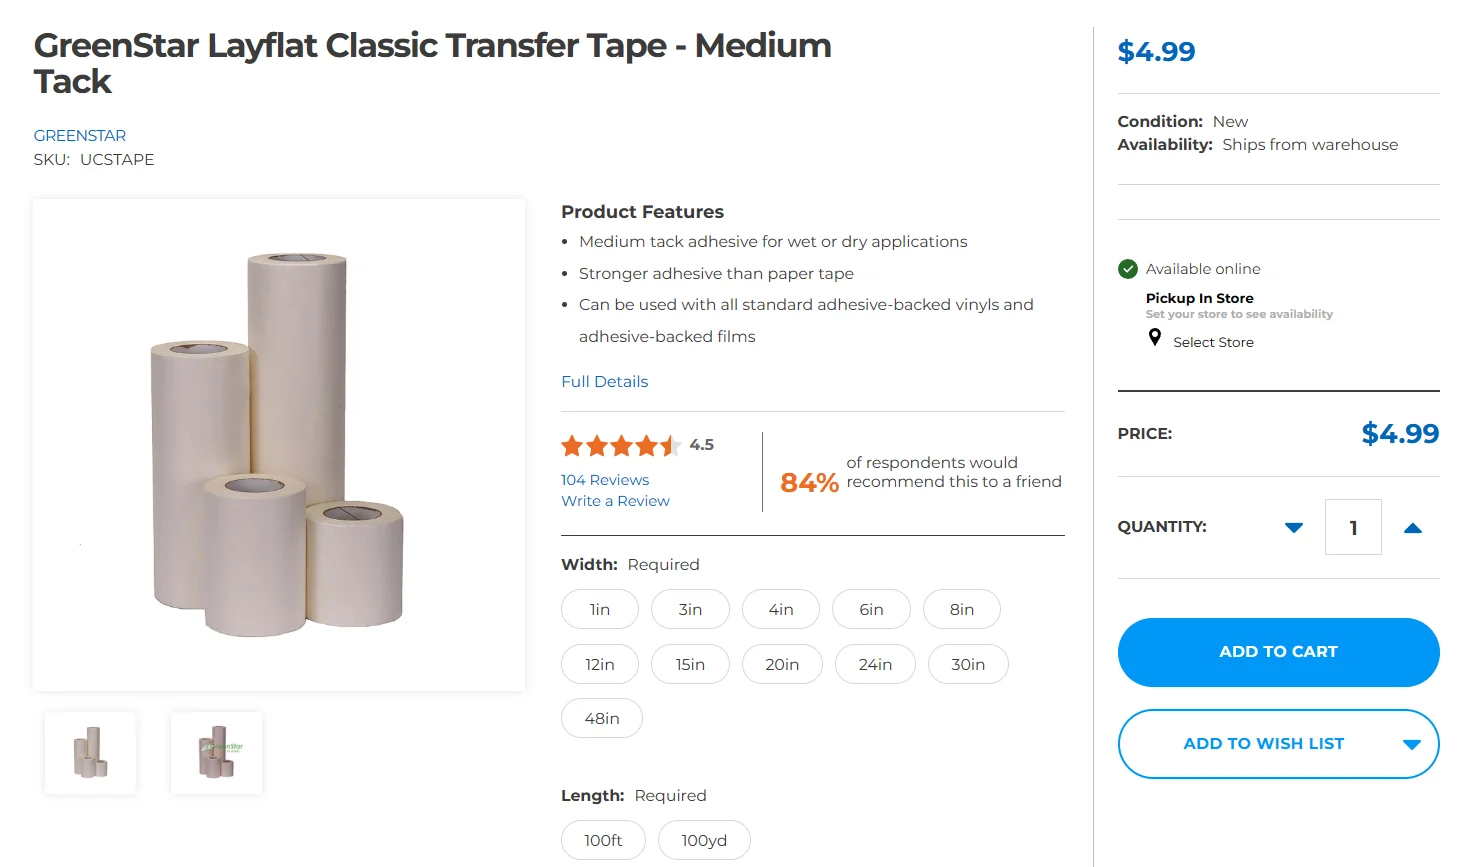 15 eCommerce Product Page Design Ideas Your Users Will Love